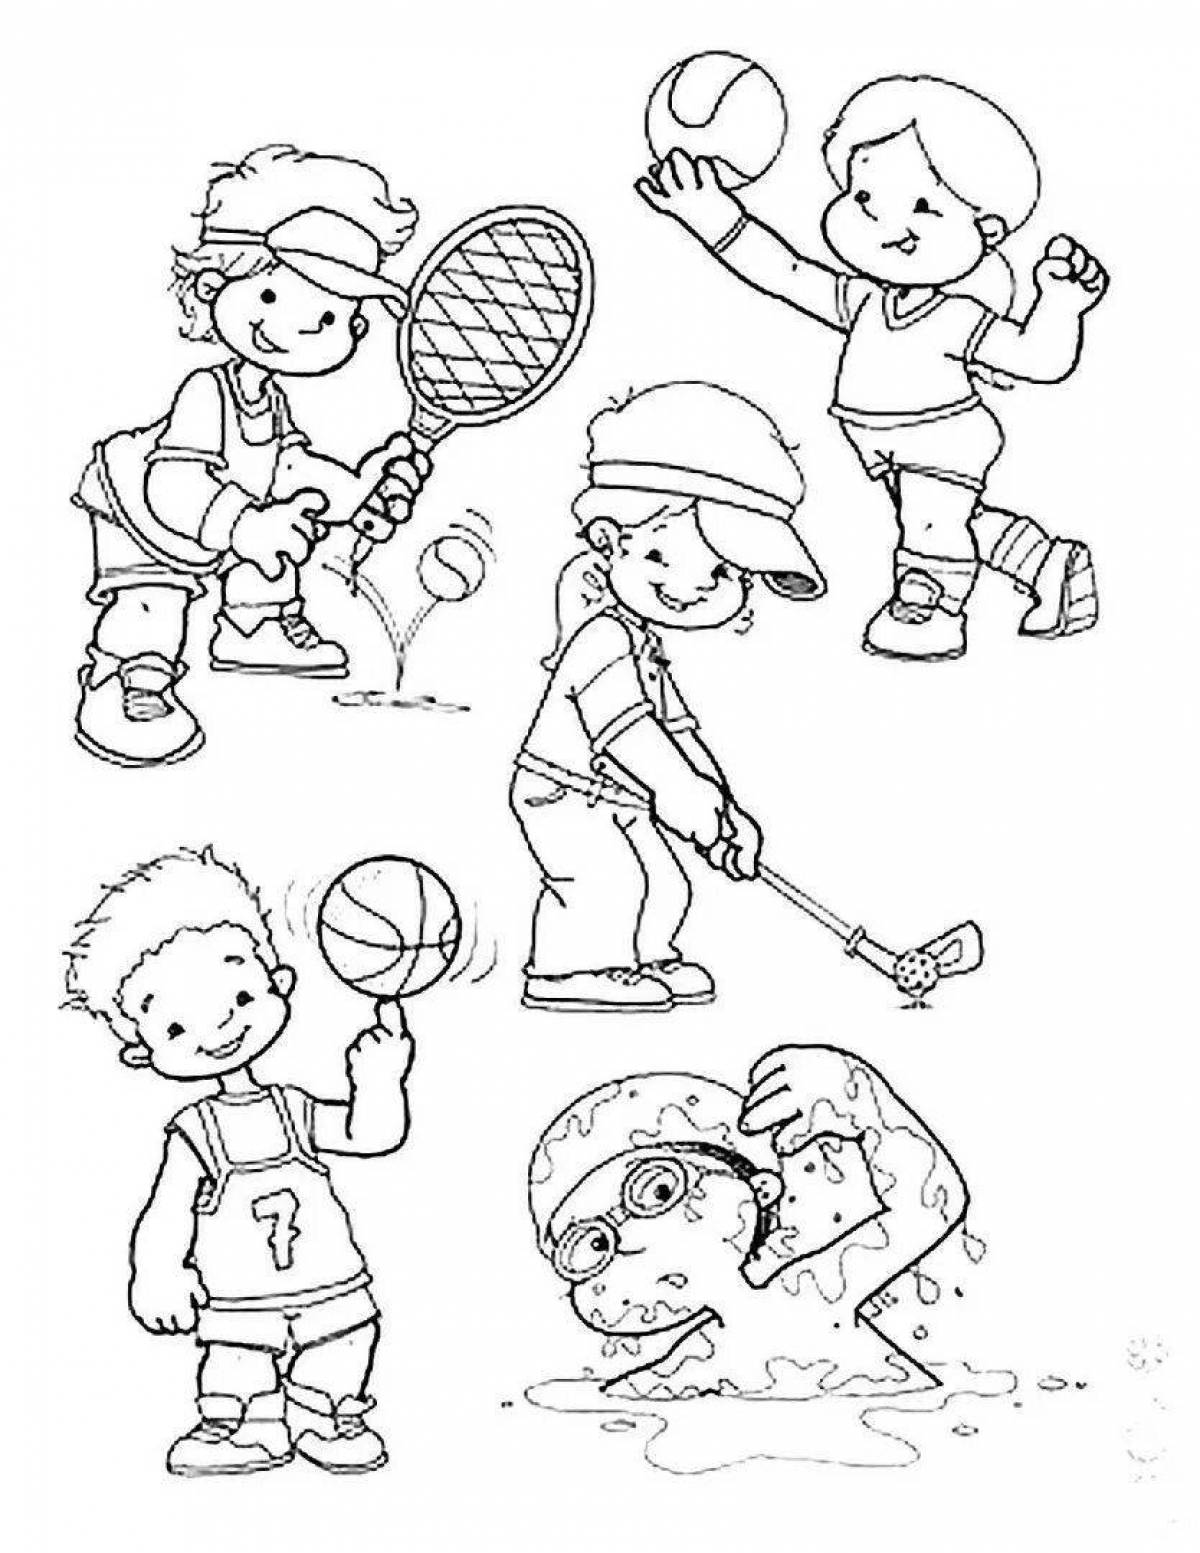 Colorful sports coloring pages for kids